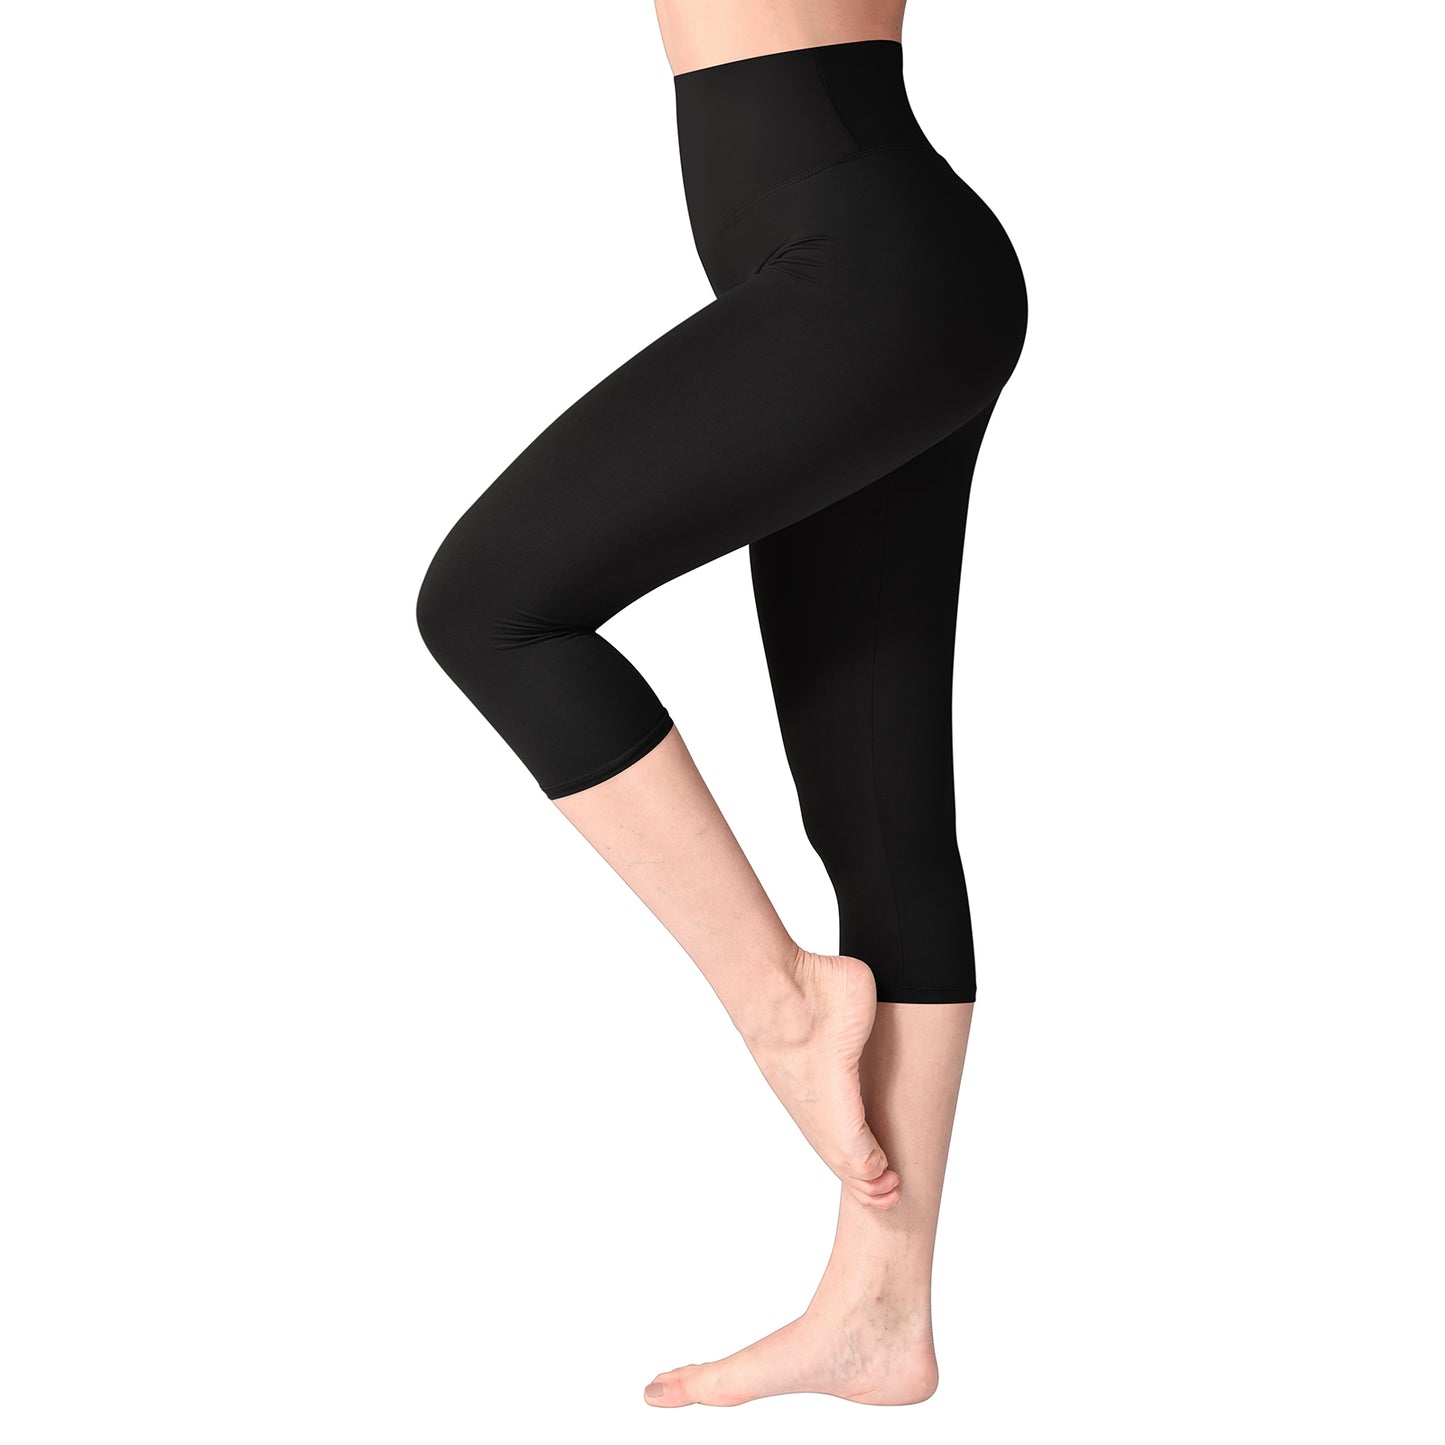  SINOPHANT High Waisted Leggings For Women - Full Length &  Capri Buttery Soft Yoga Pants For Workout Athletic